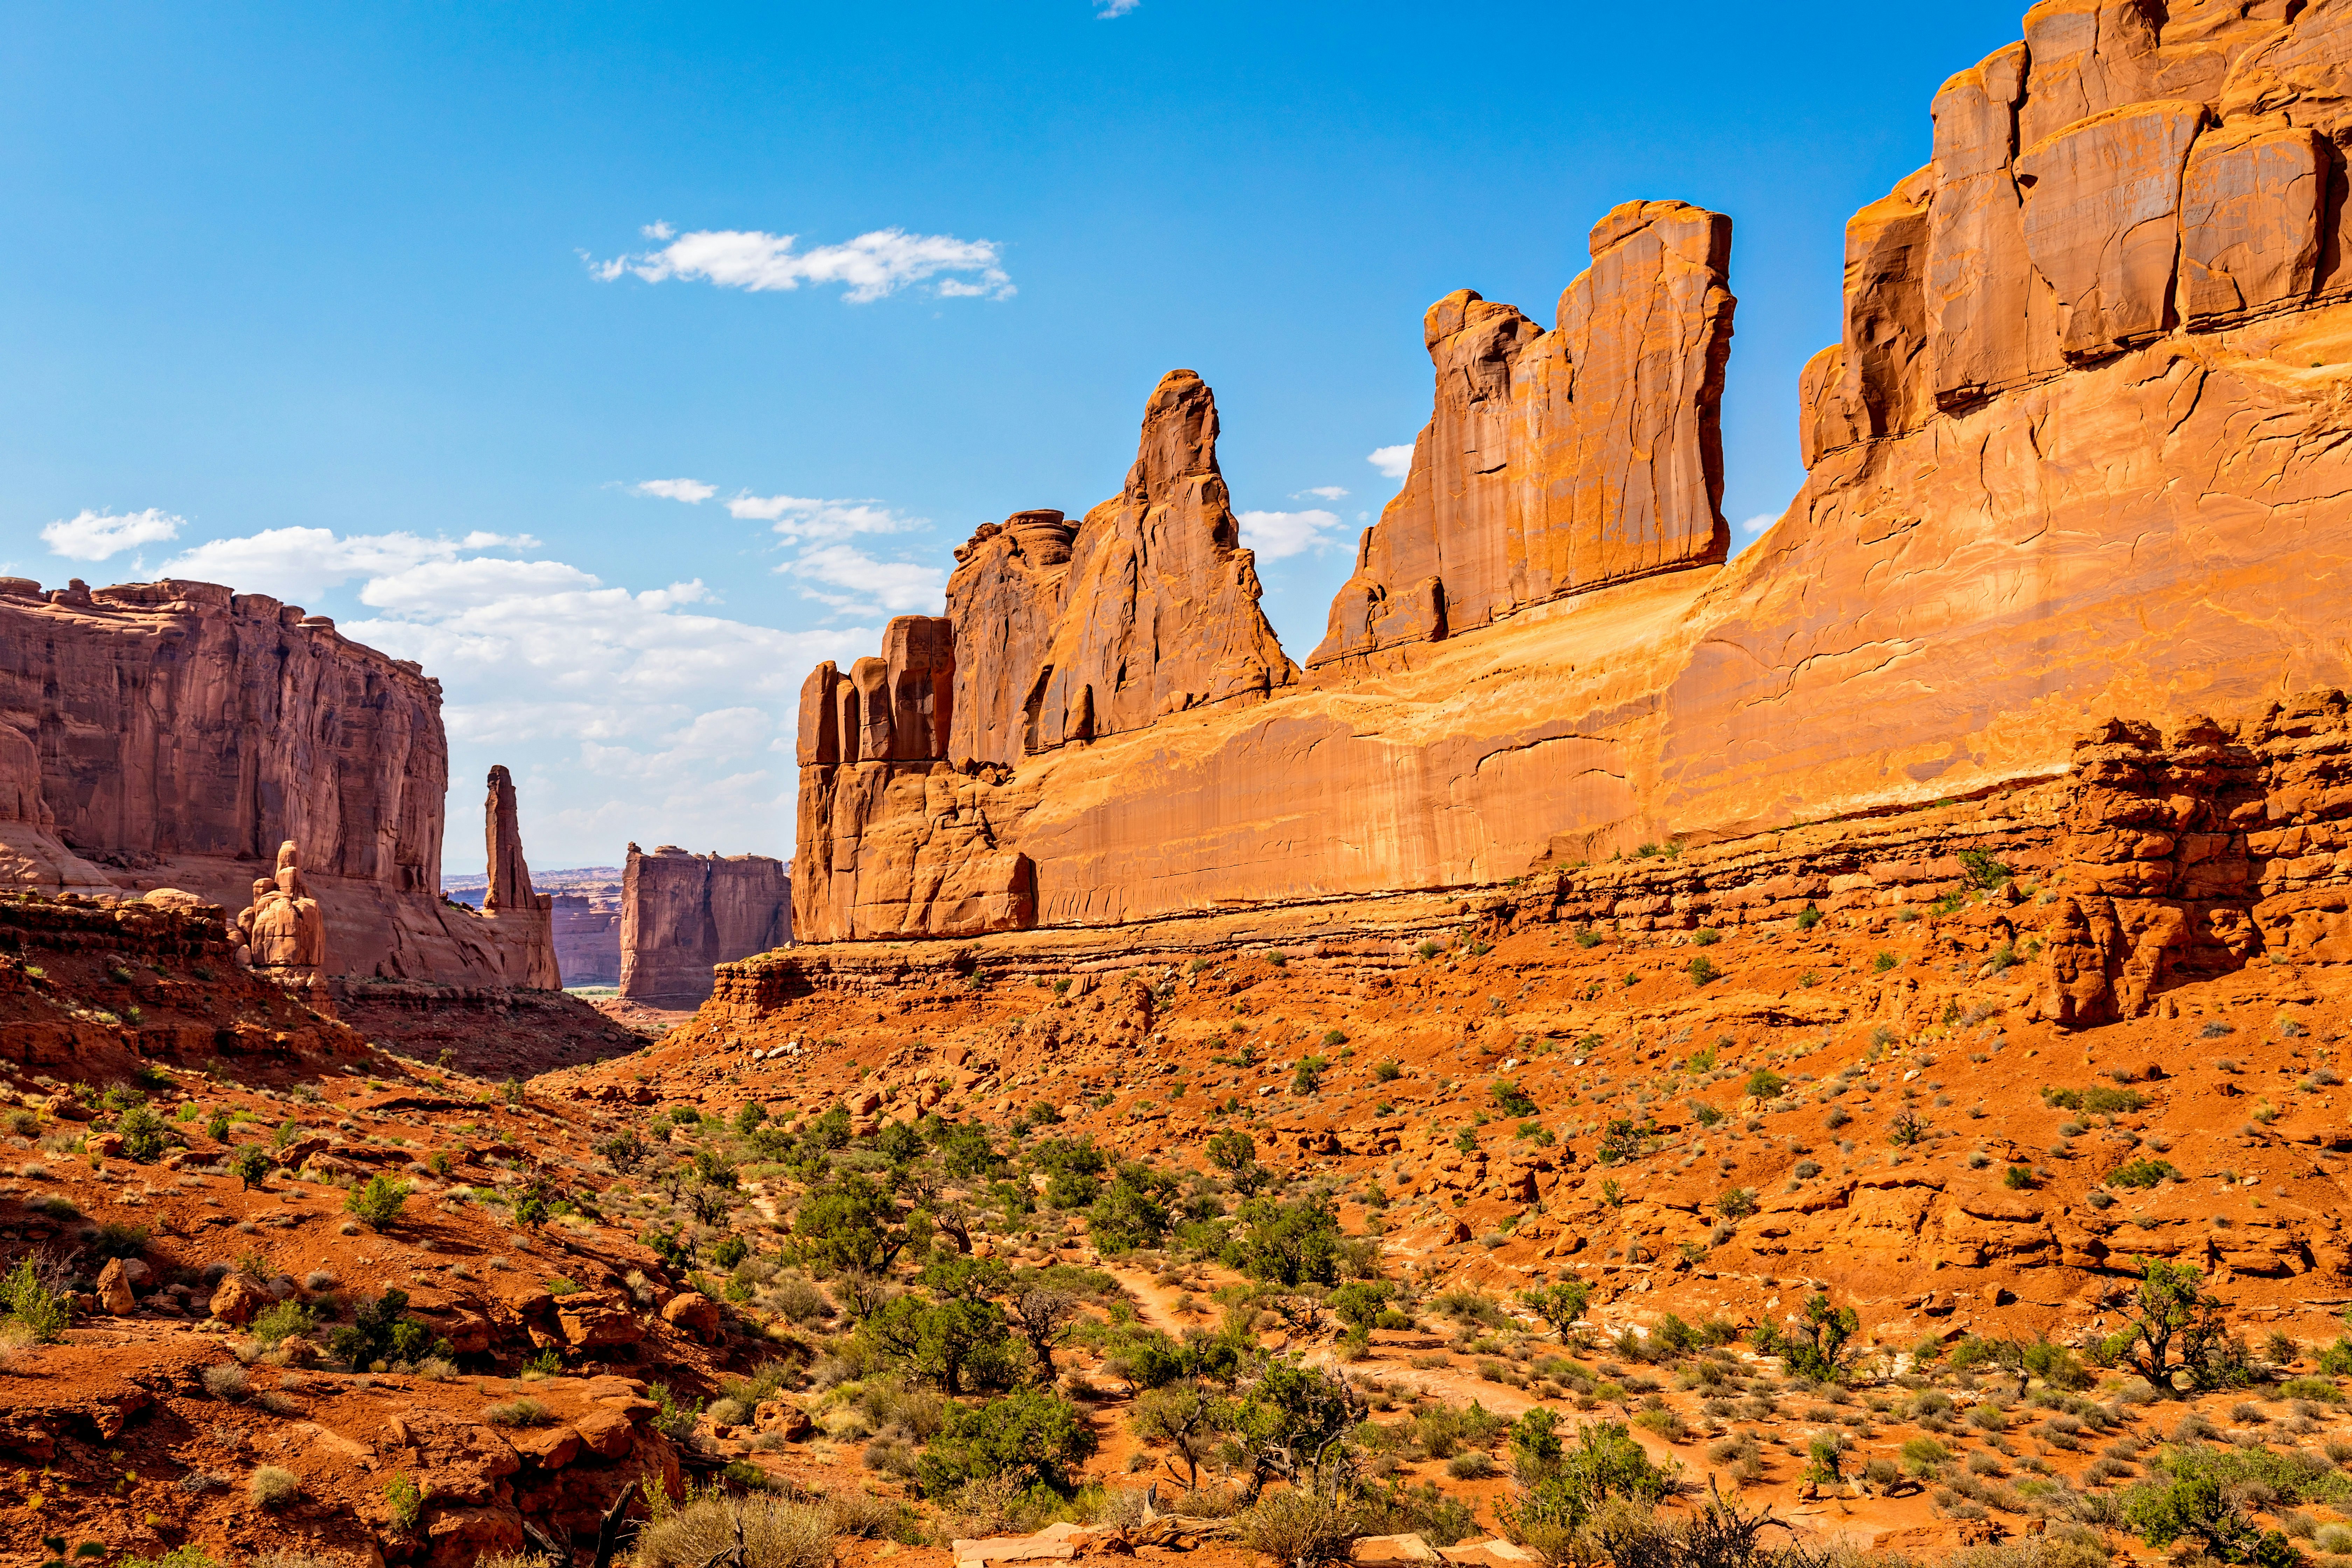 The red-rock cathedrals of Arches National Park near the Park Avenue Trailhead